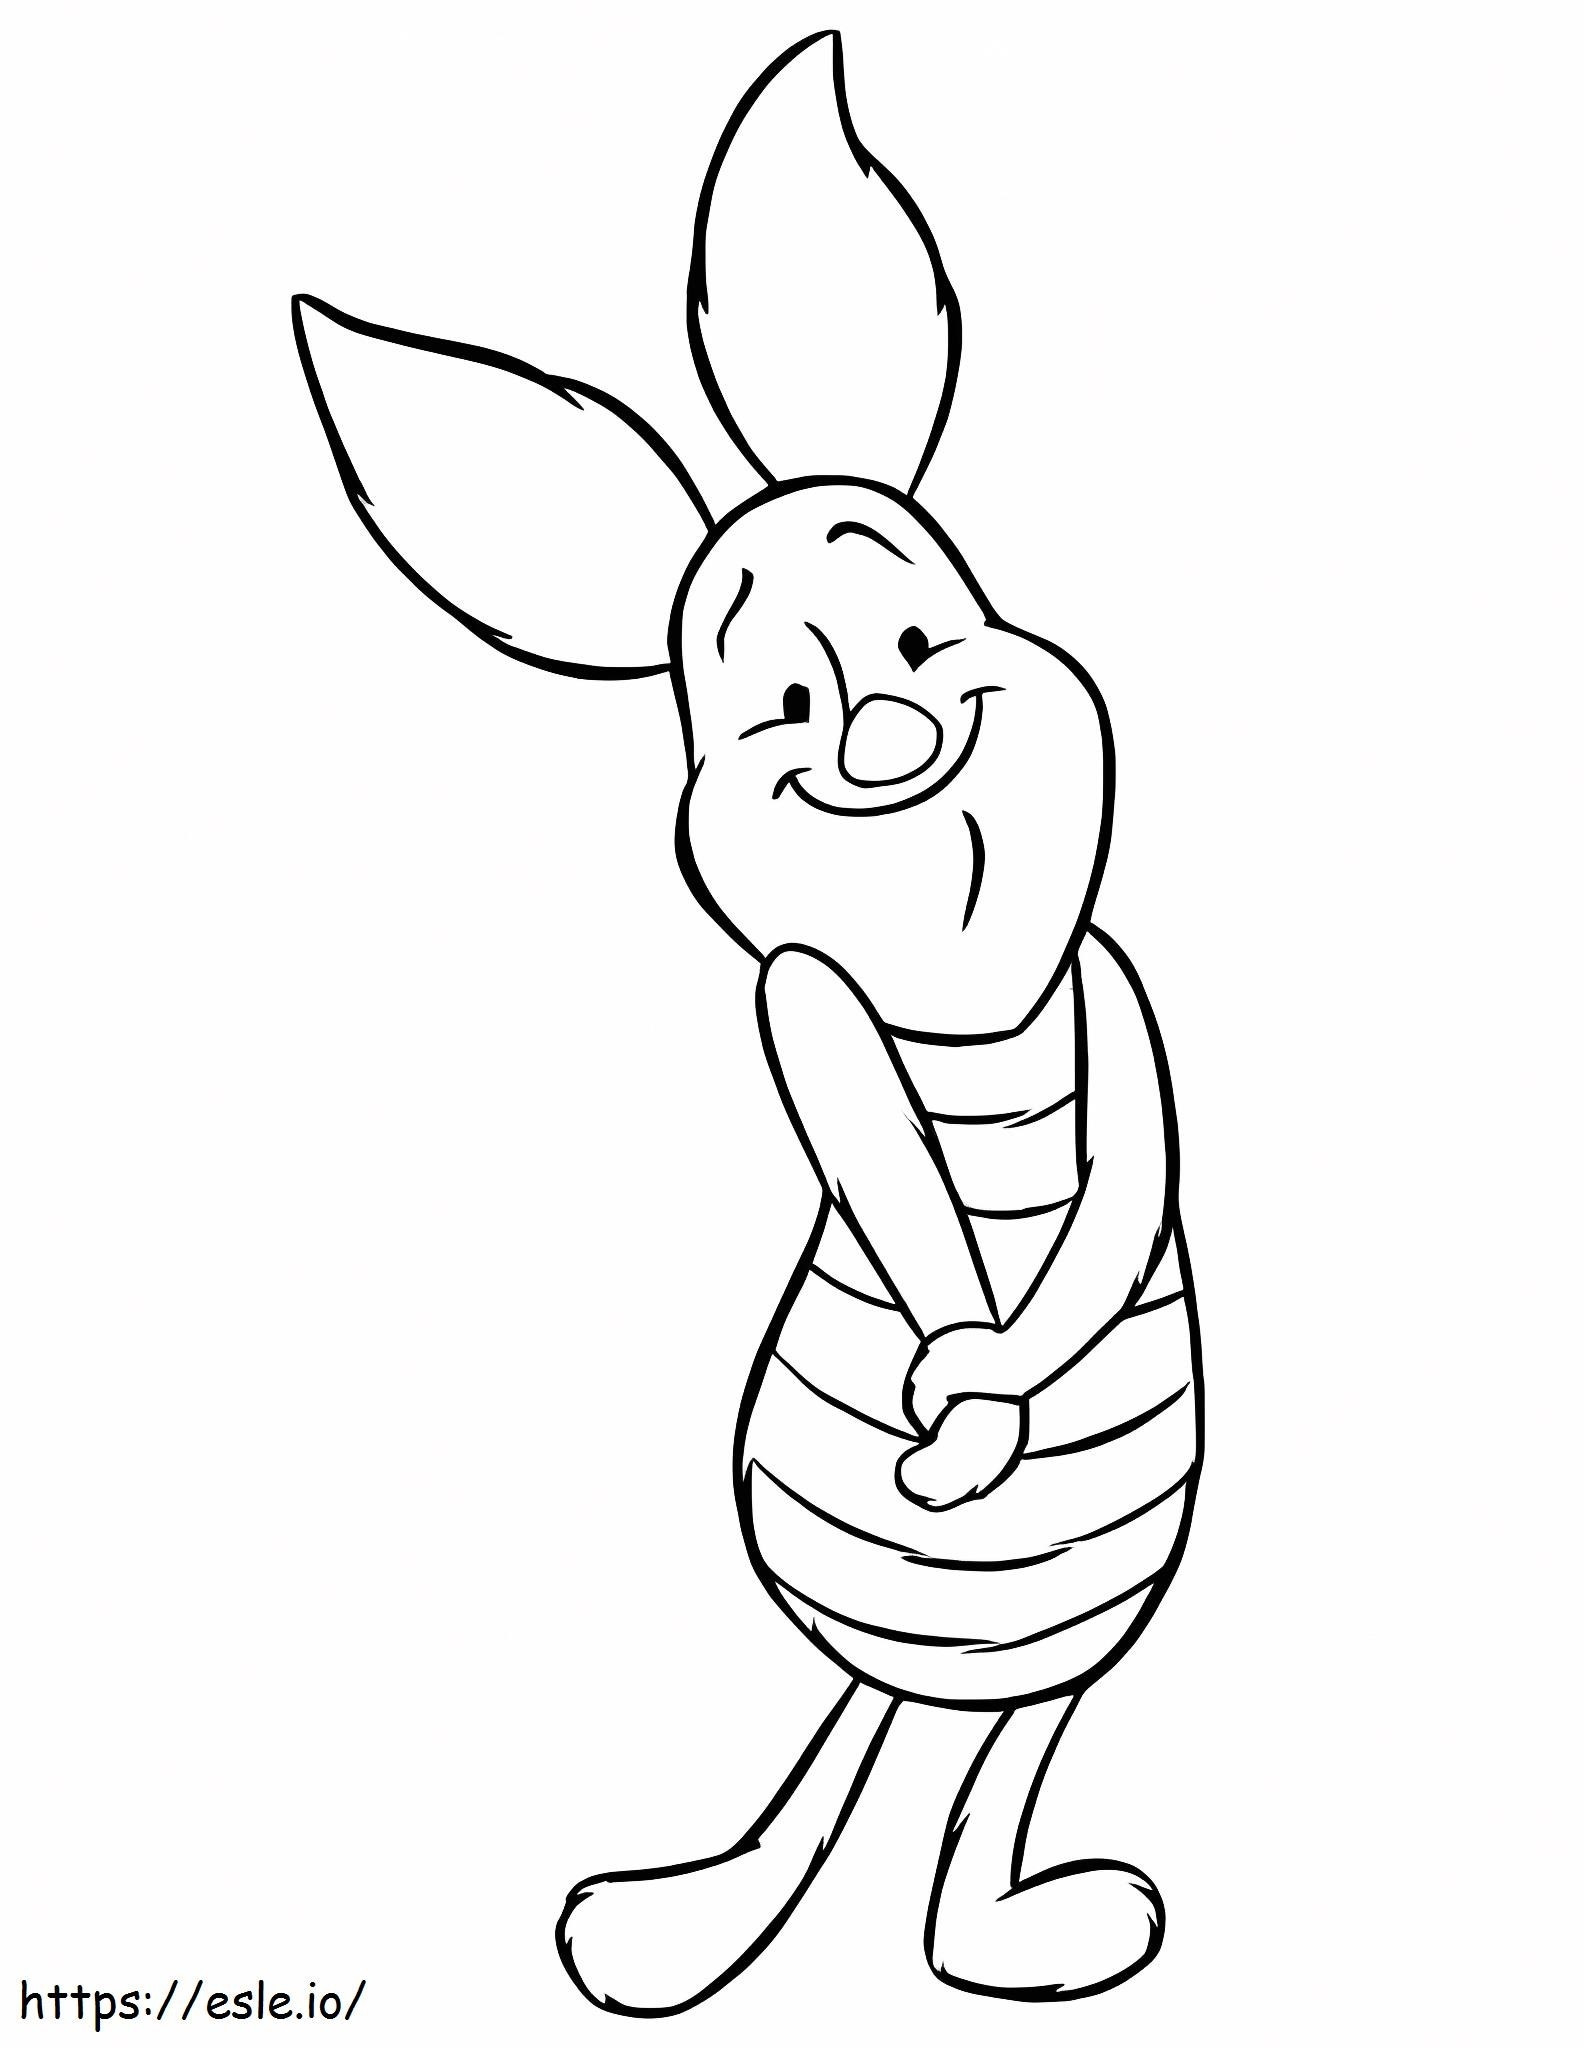 Normal Piglet coloring page